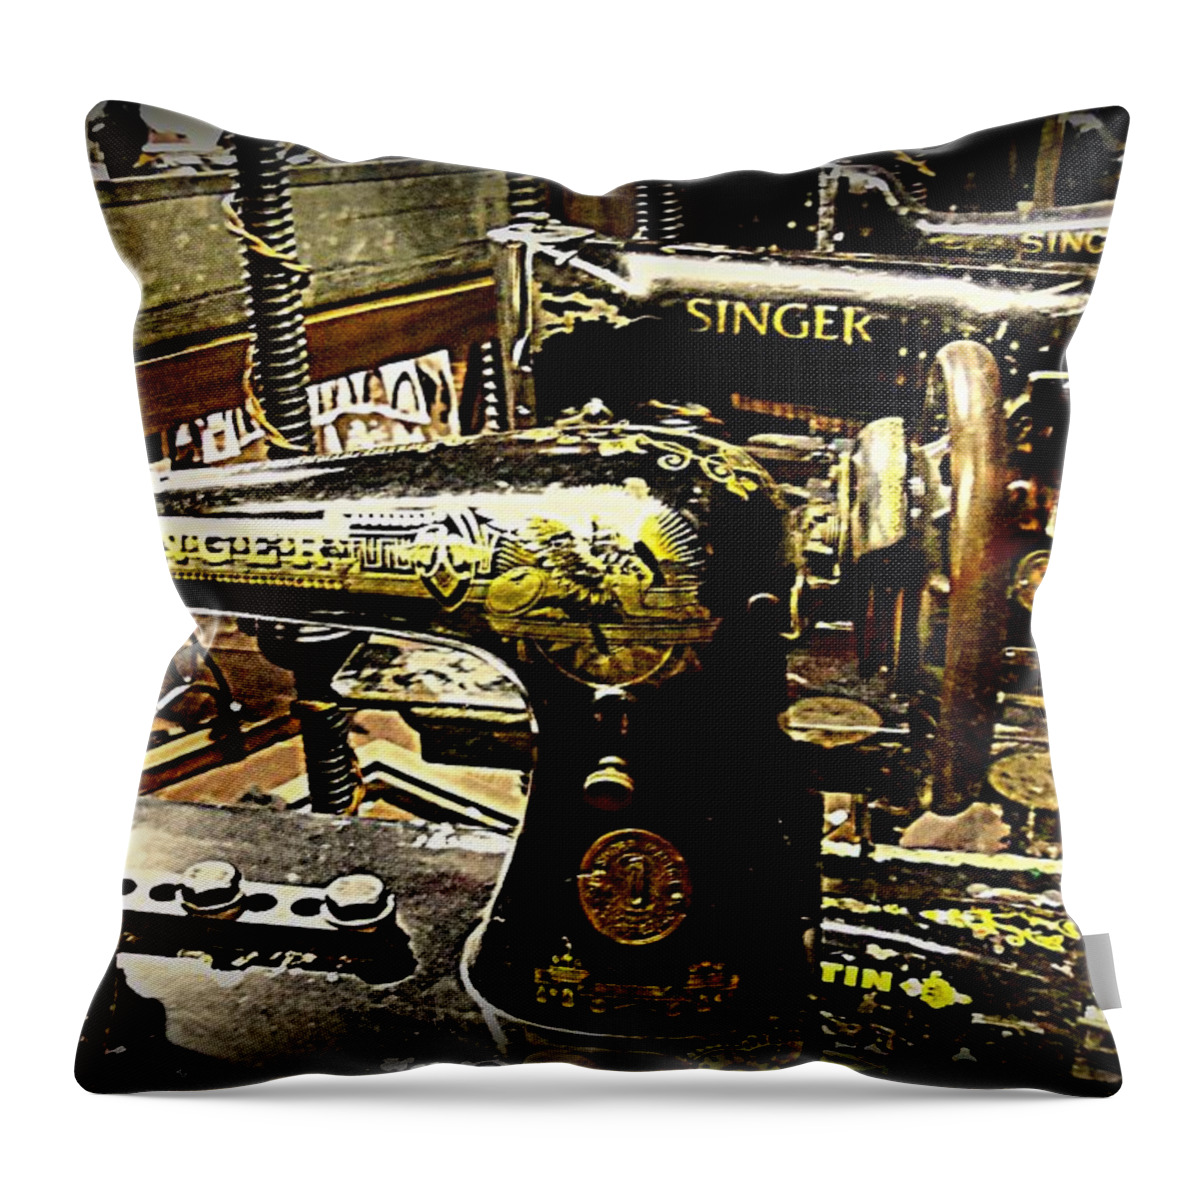 Old Sewing Machines Throw Pillow featuring the photograph Four Old Singers by Randall Weidner